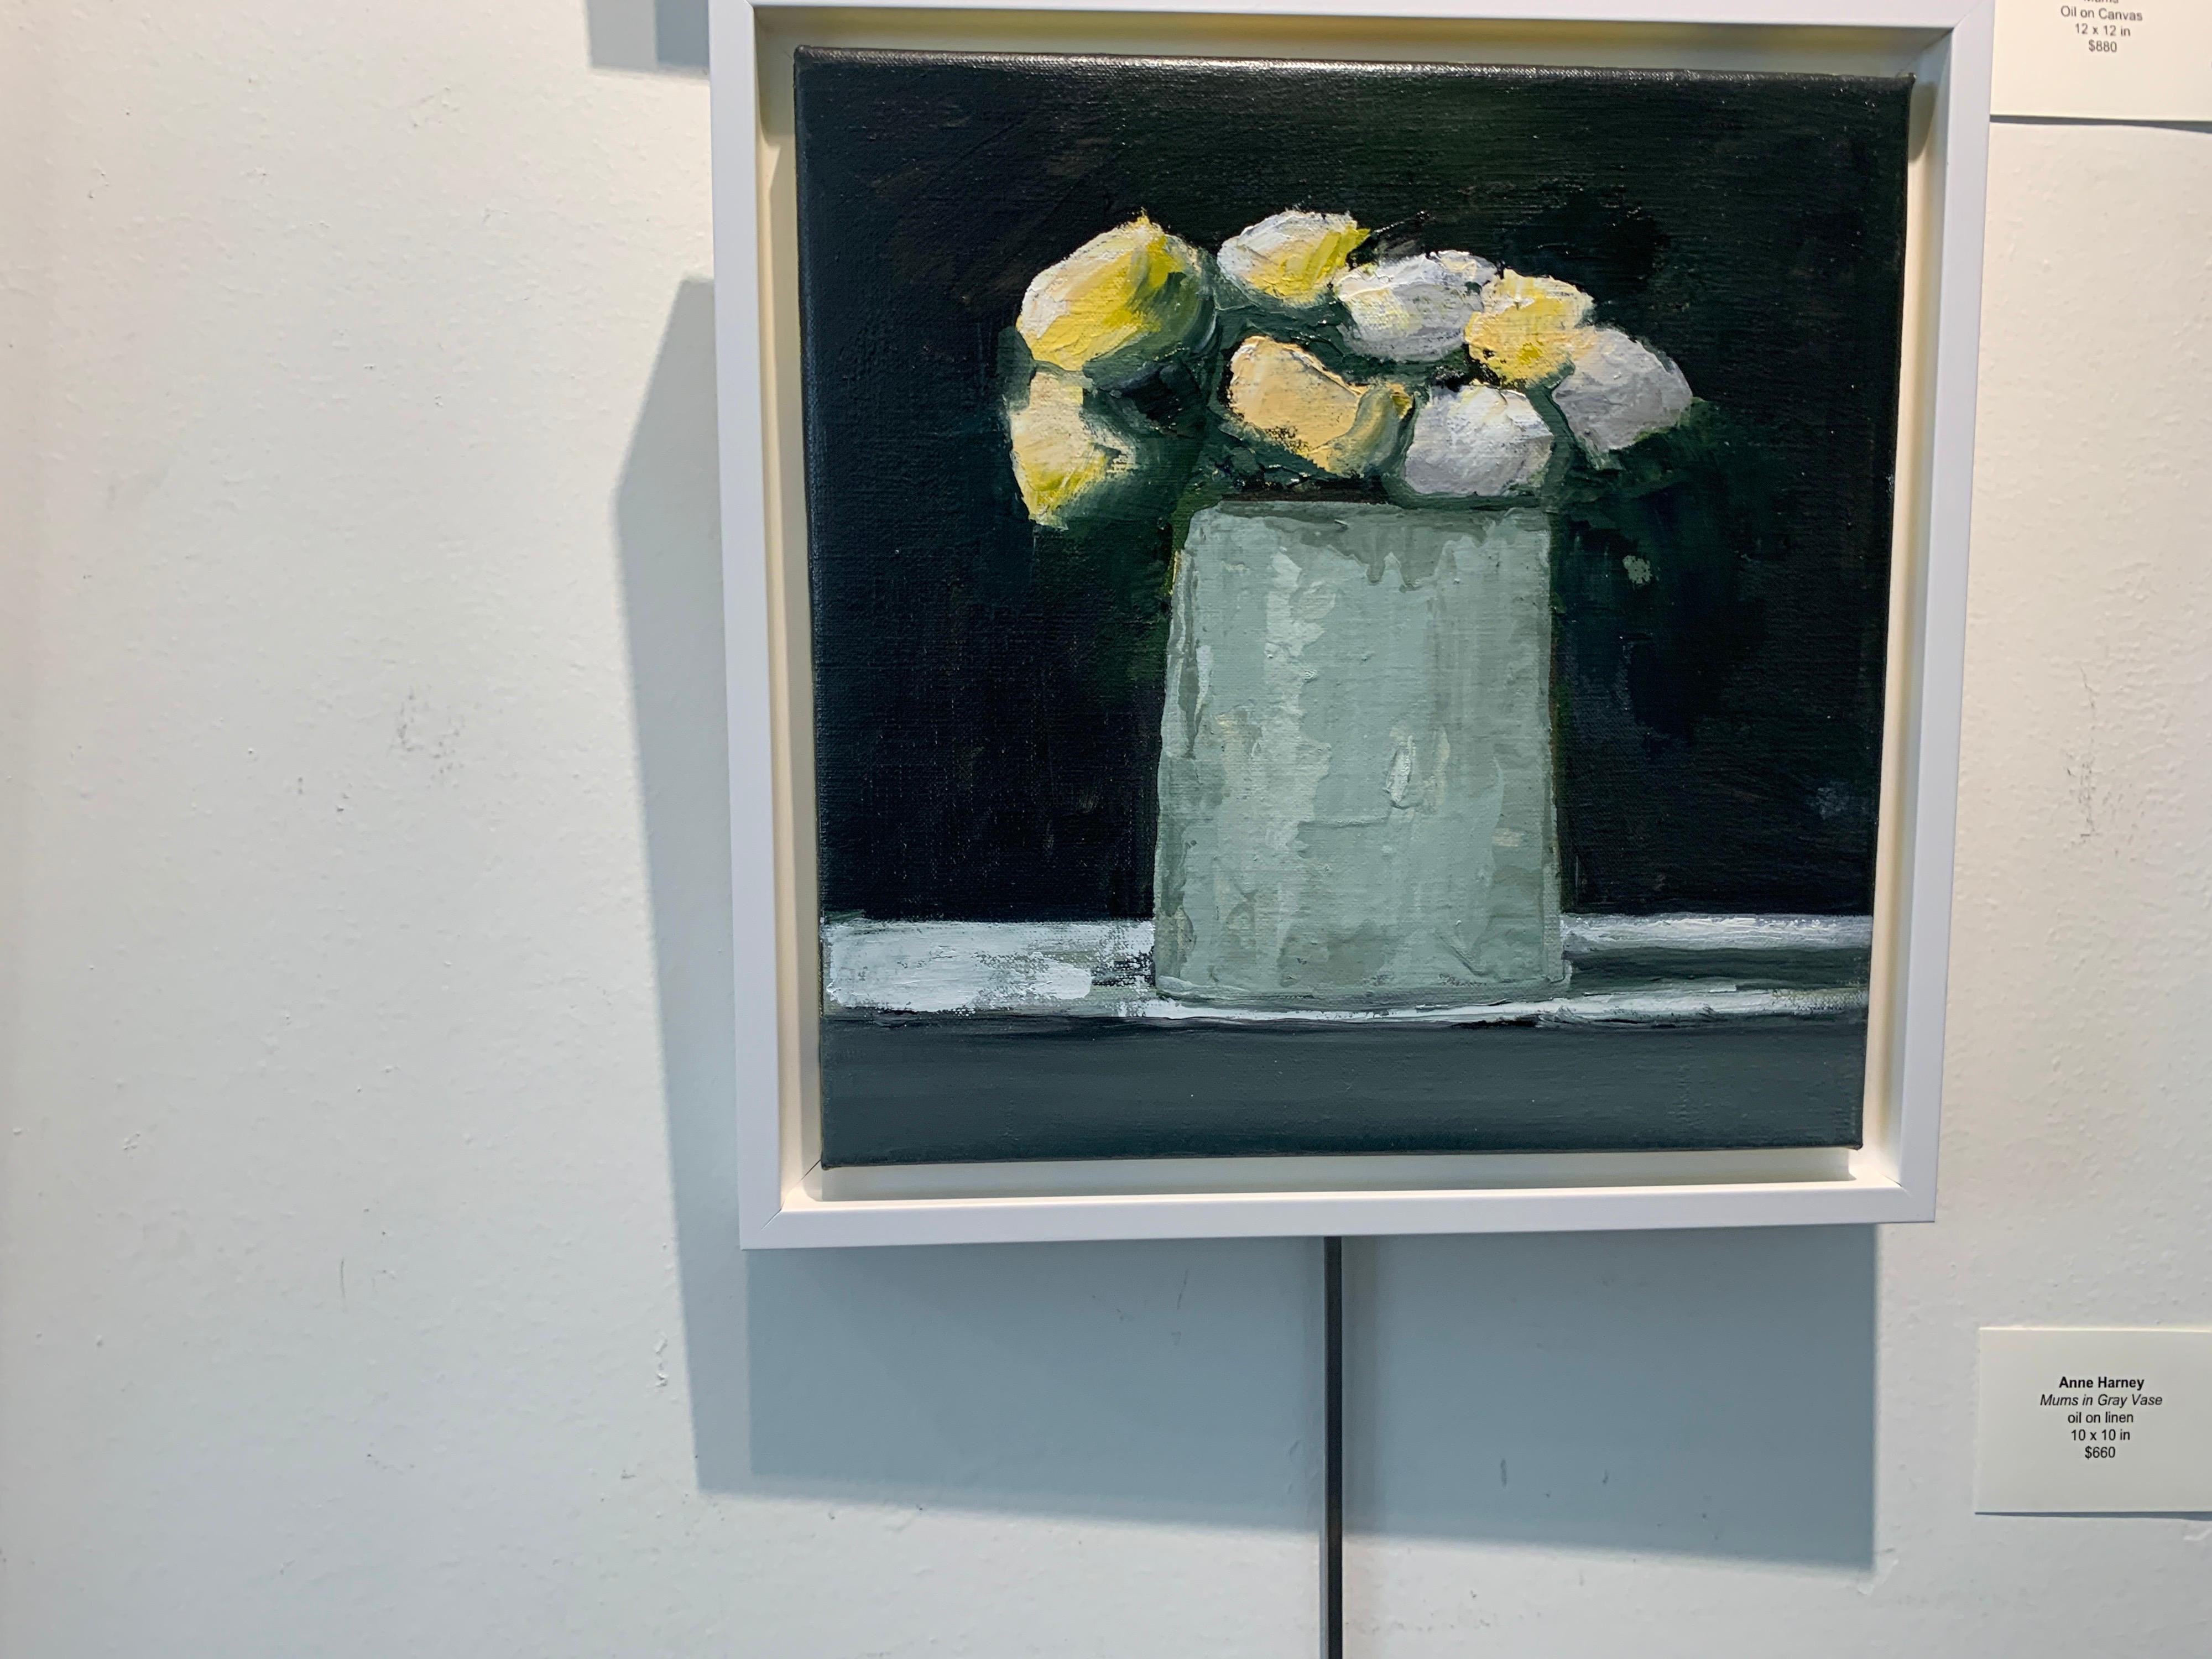 Mums in Gray Vase by Anne Harney, Contemporary Floral Still Life Painting 2